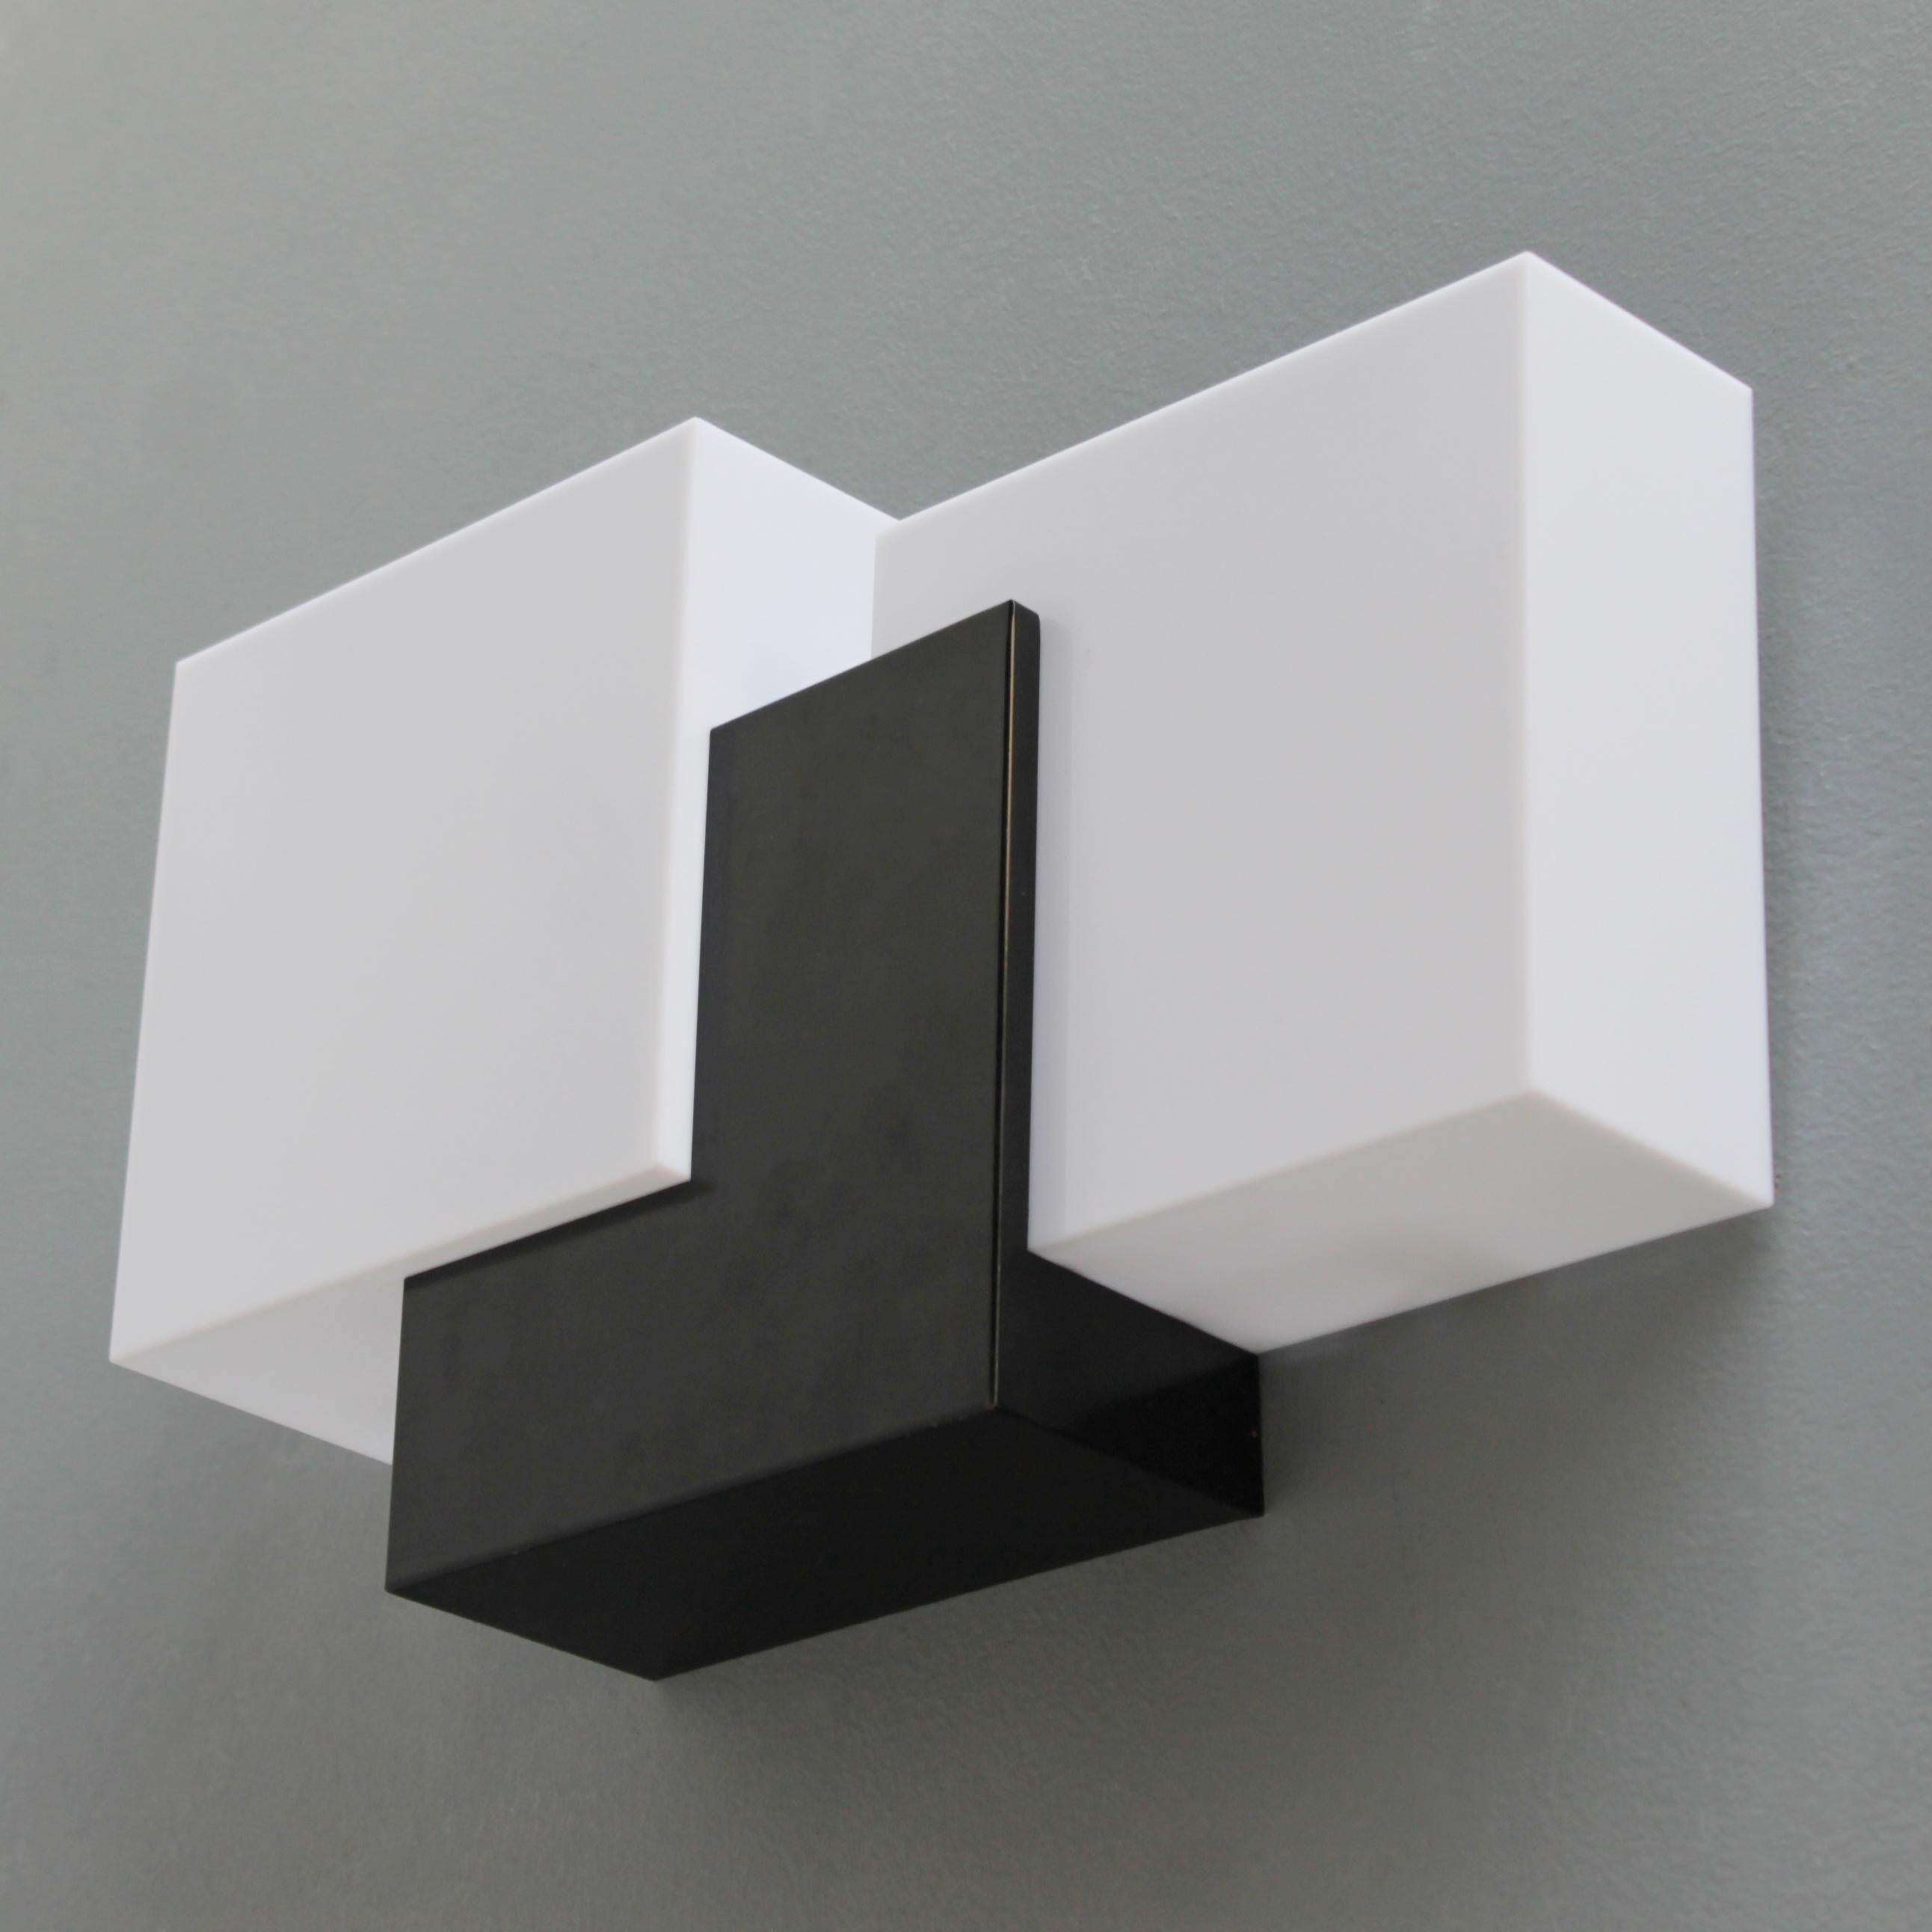 Mid-20th Century French Modernist Wall Light from the Fifties